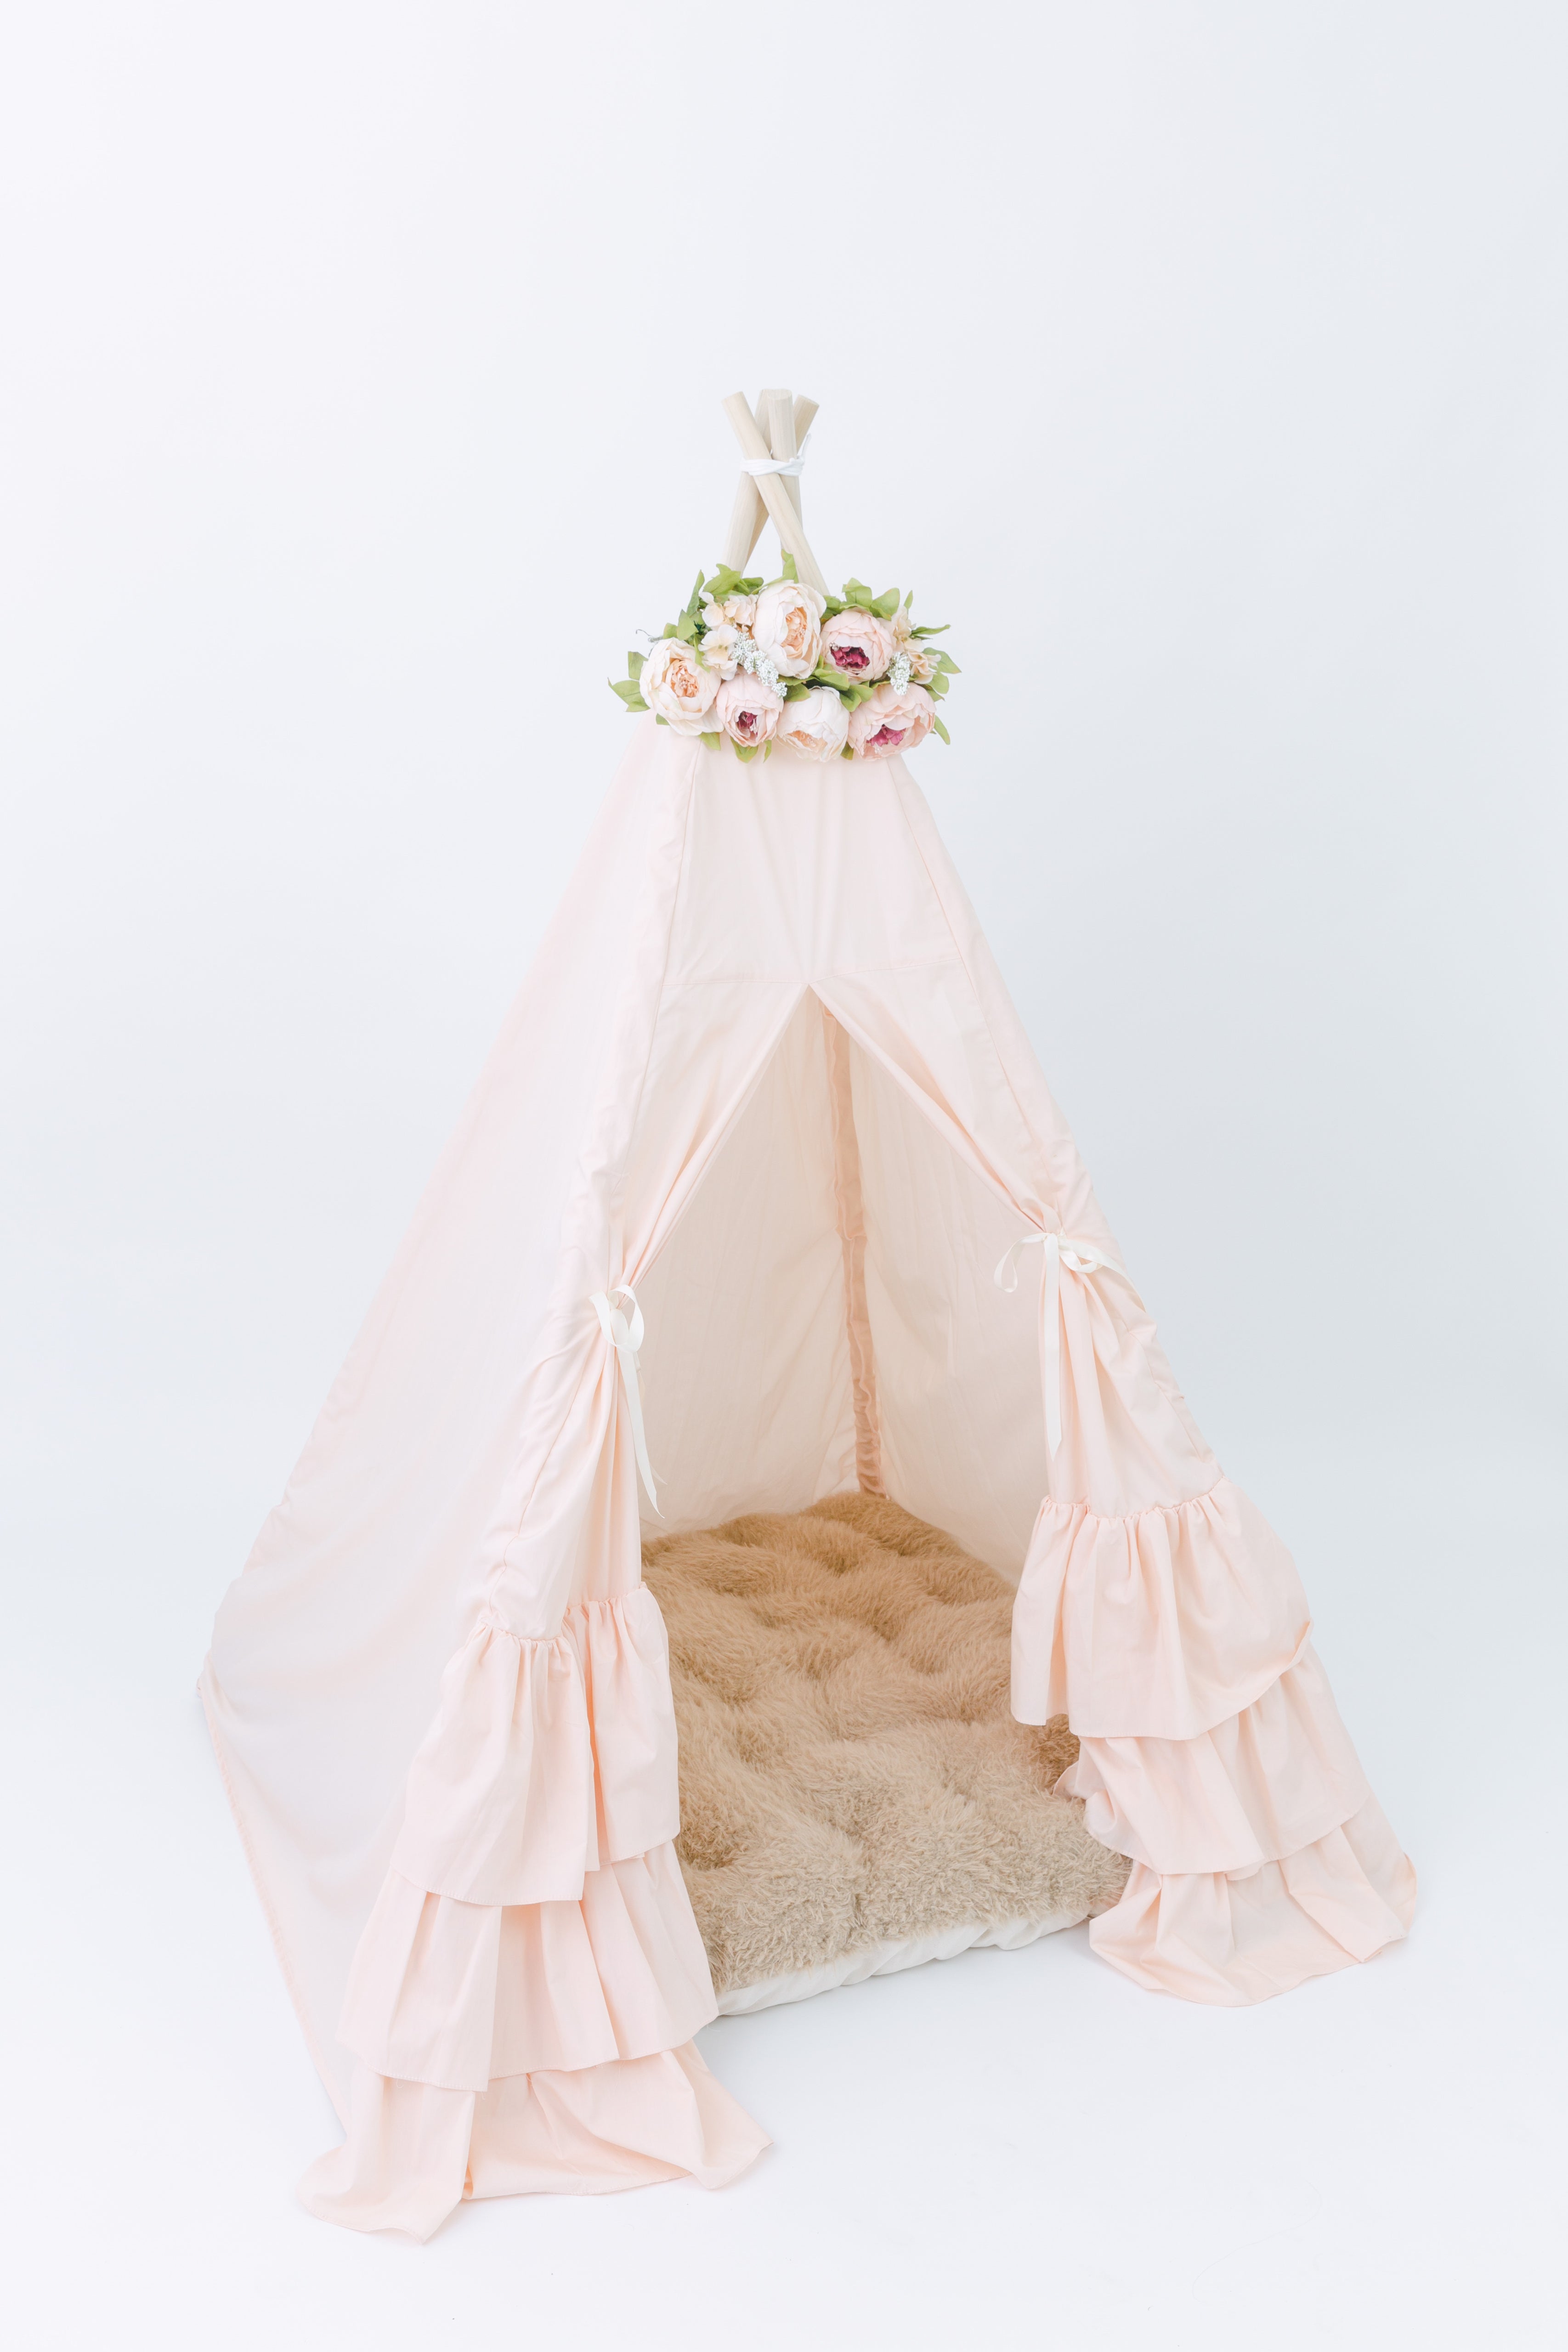 The Peach Play Tent